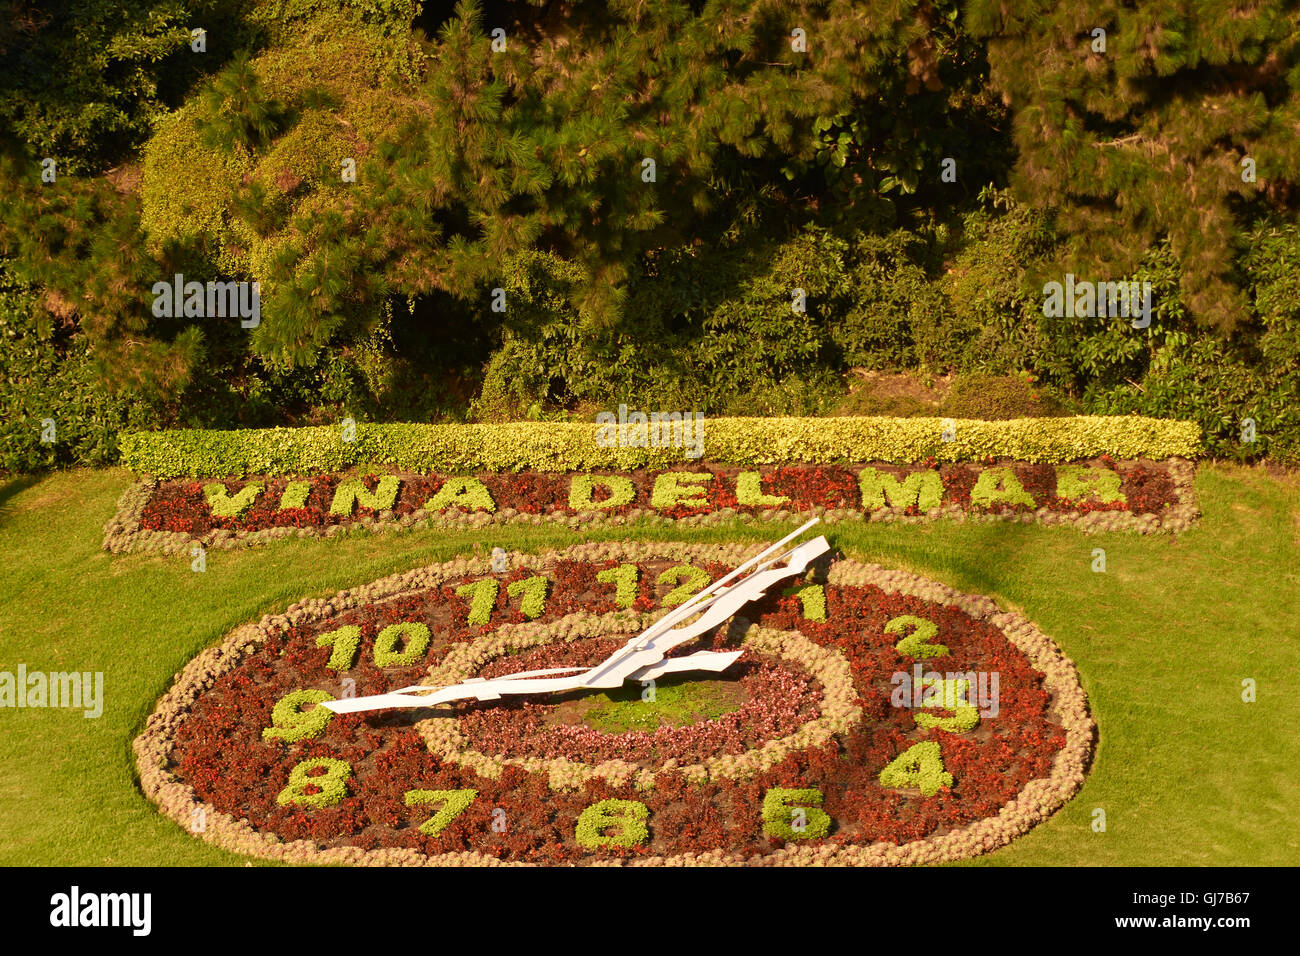 Clock made using flowers in the coastal city of Vina del Mar in central Chile. Stock Photo